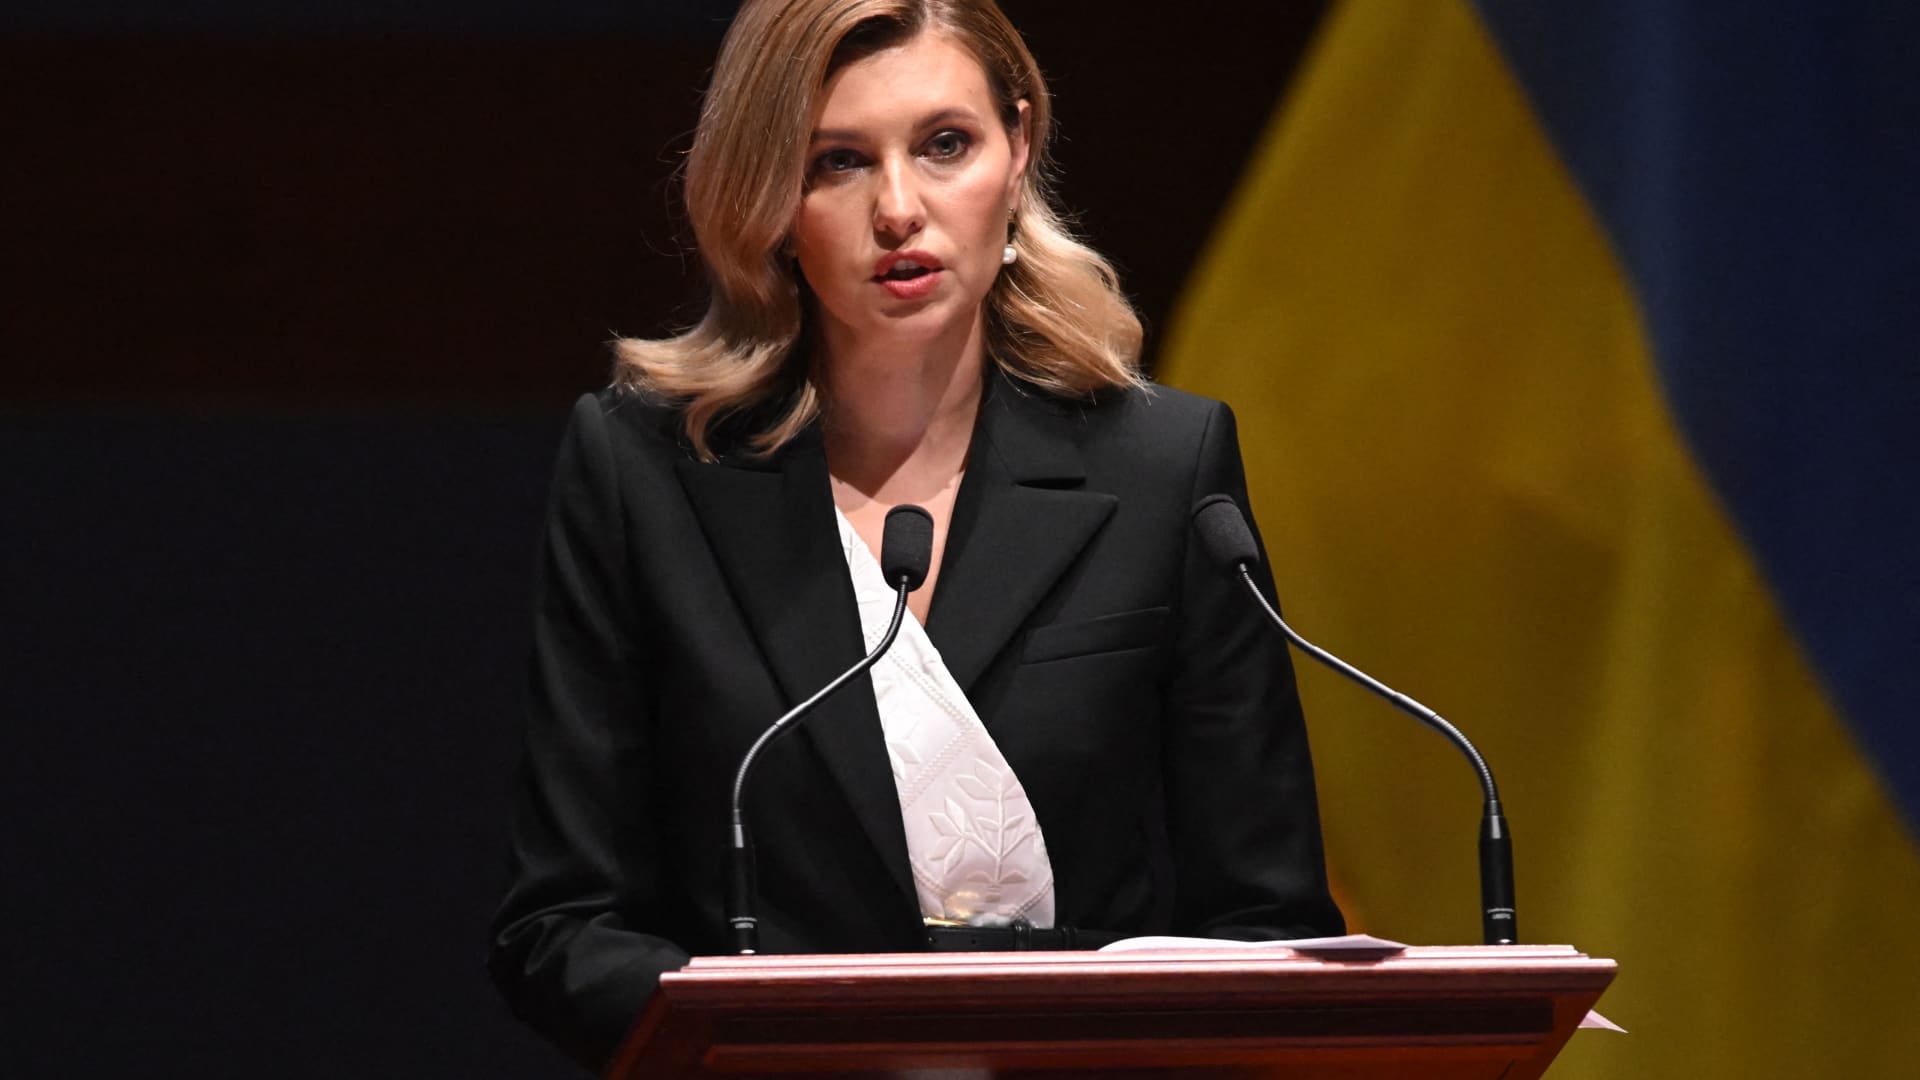 Ukrainian first lady urges Congress to send more weapons for fight against Russia